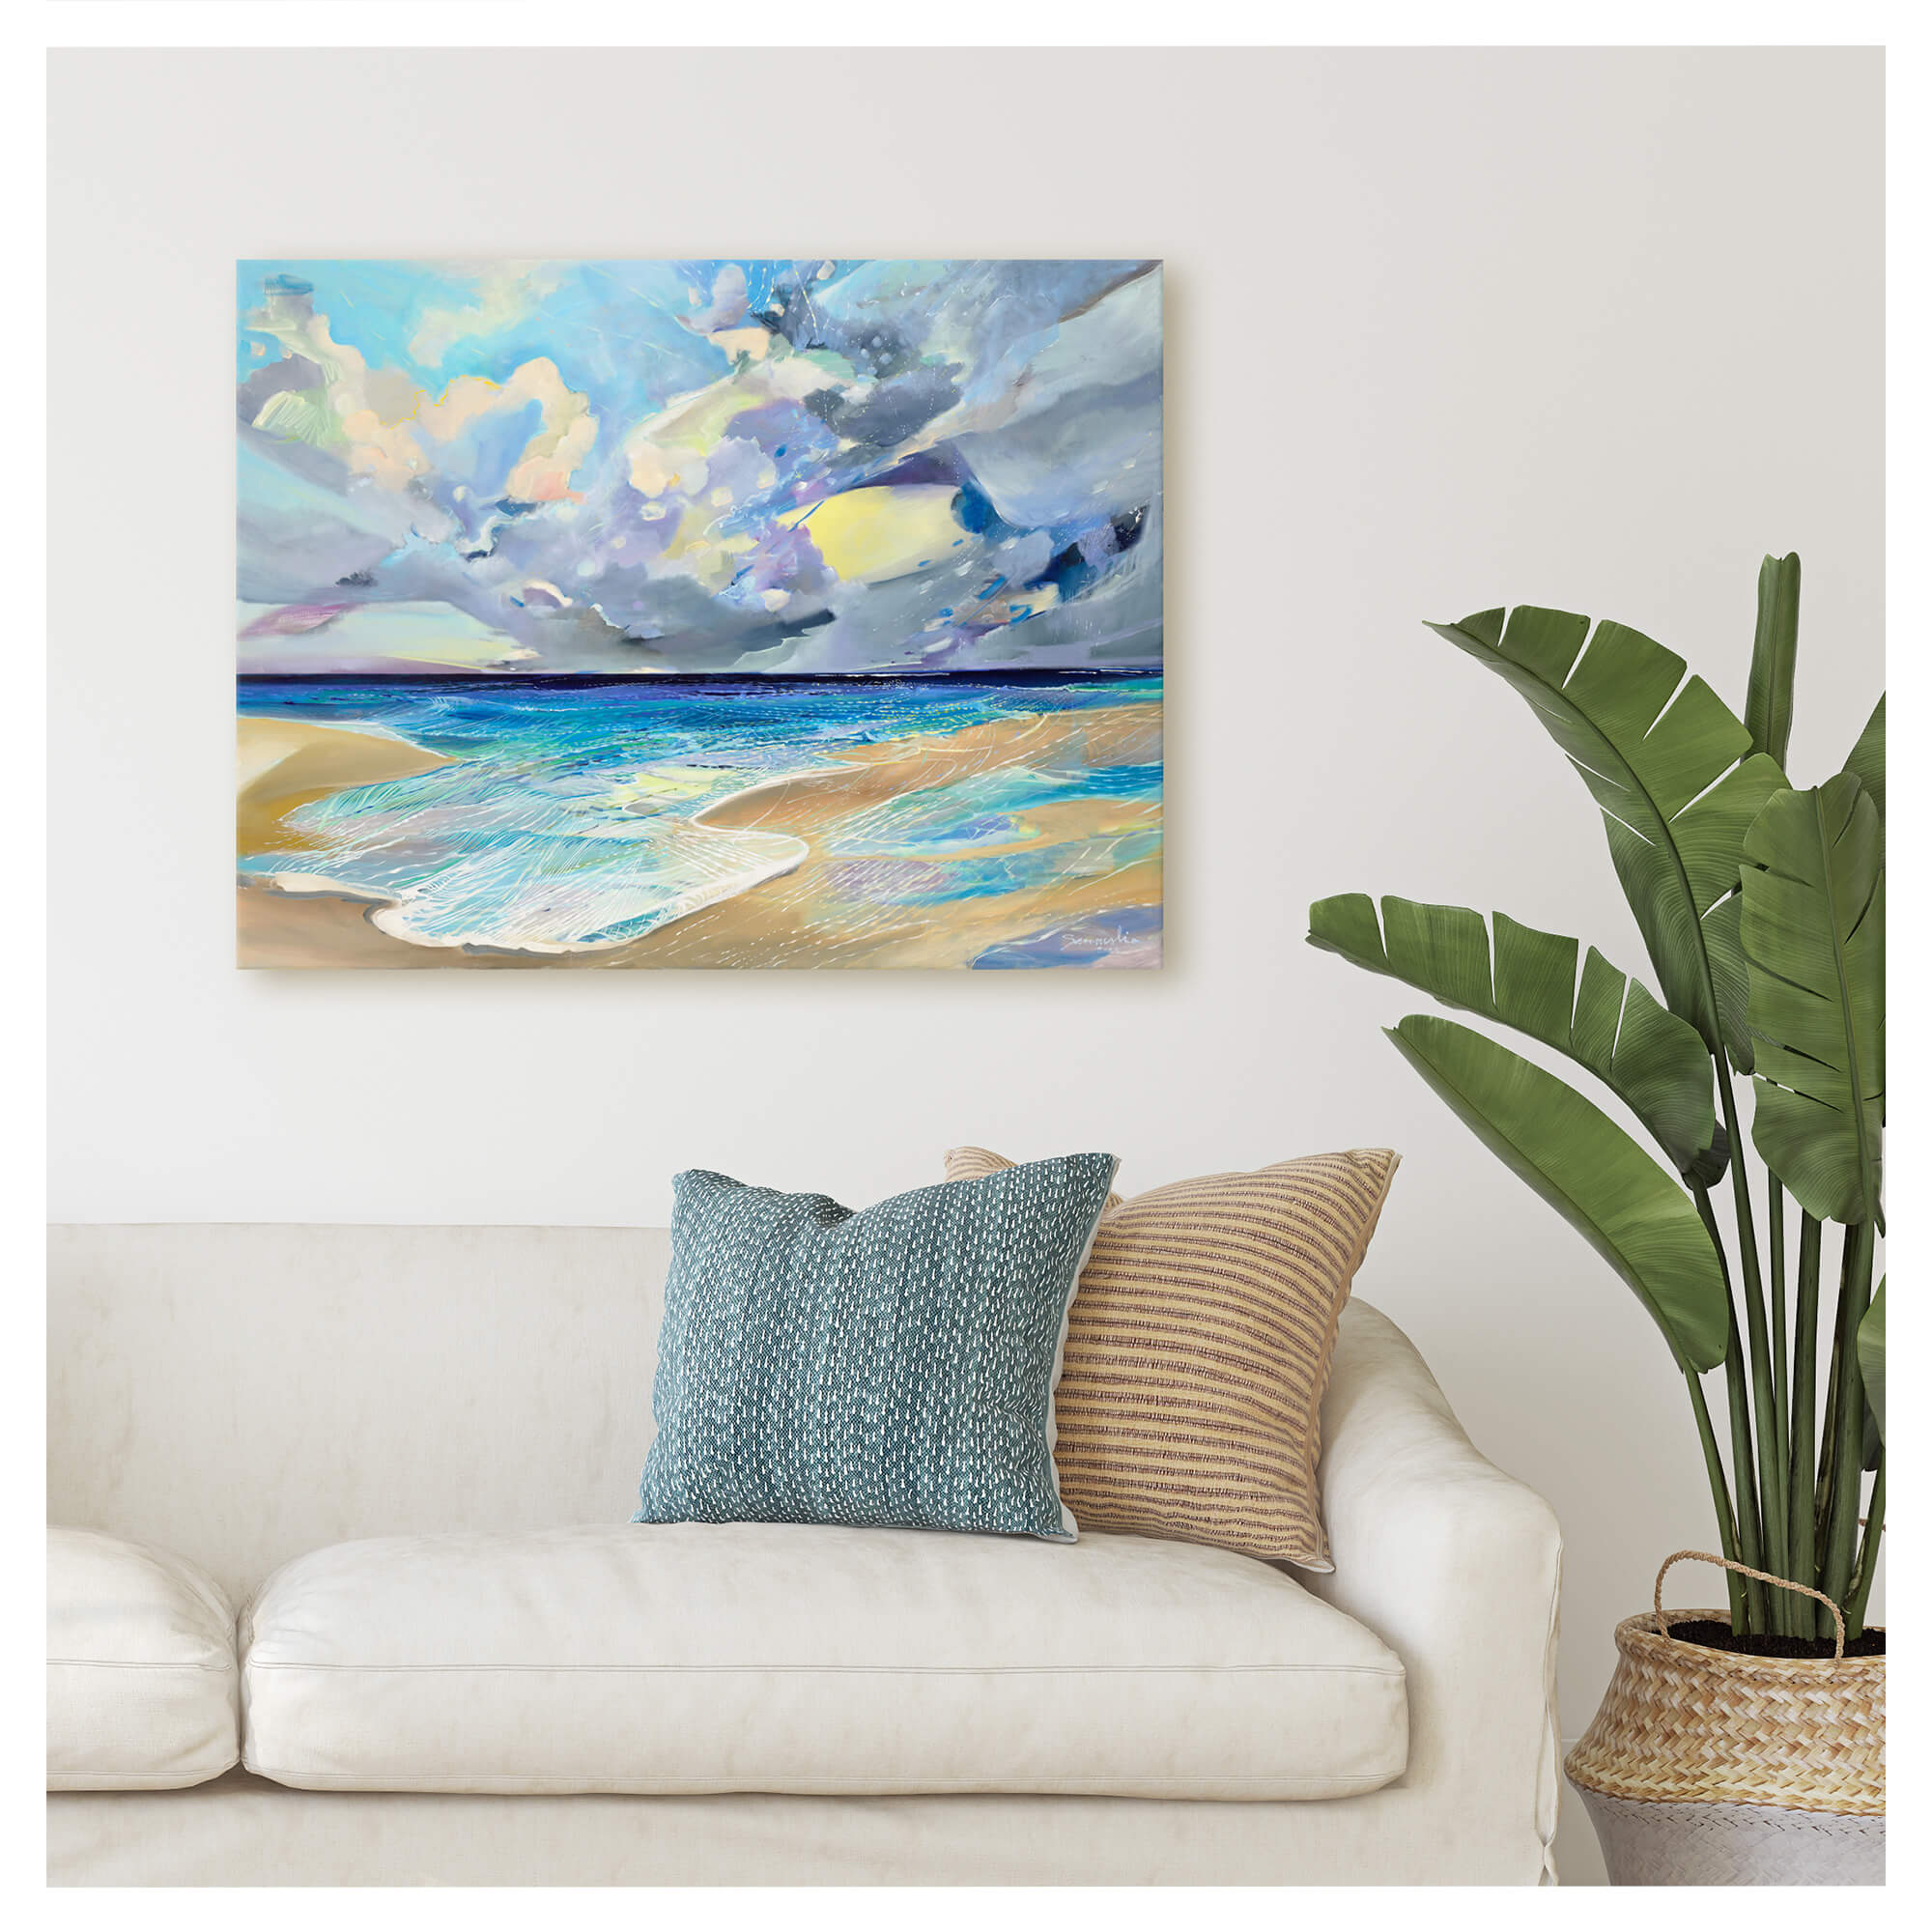 Abstract seascape painting with teal ocean waves and white sand by Hawaii artist Saumolia Puapuaga